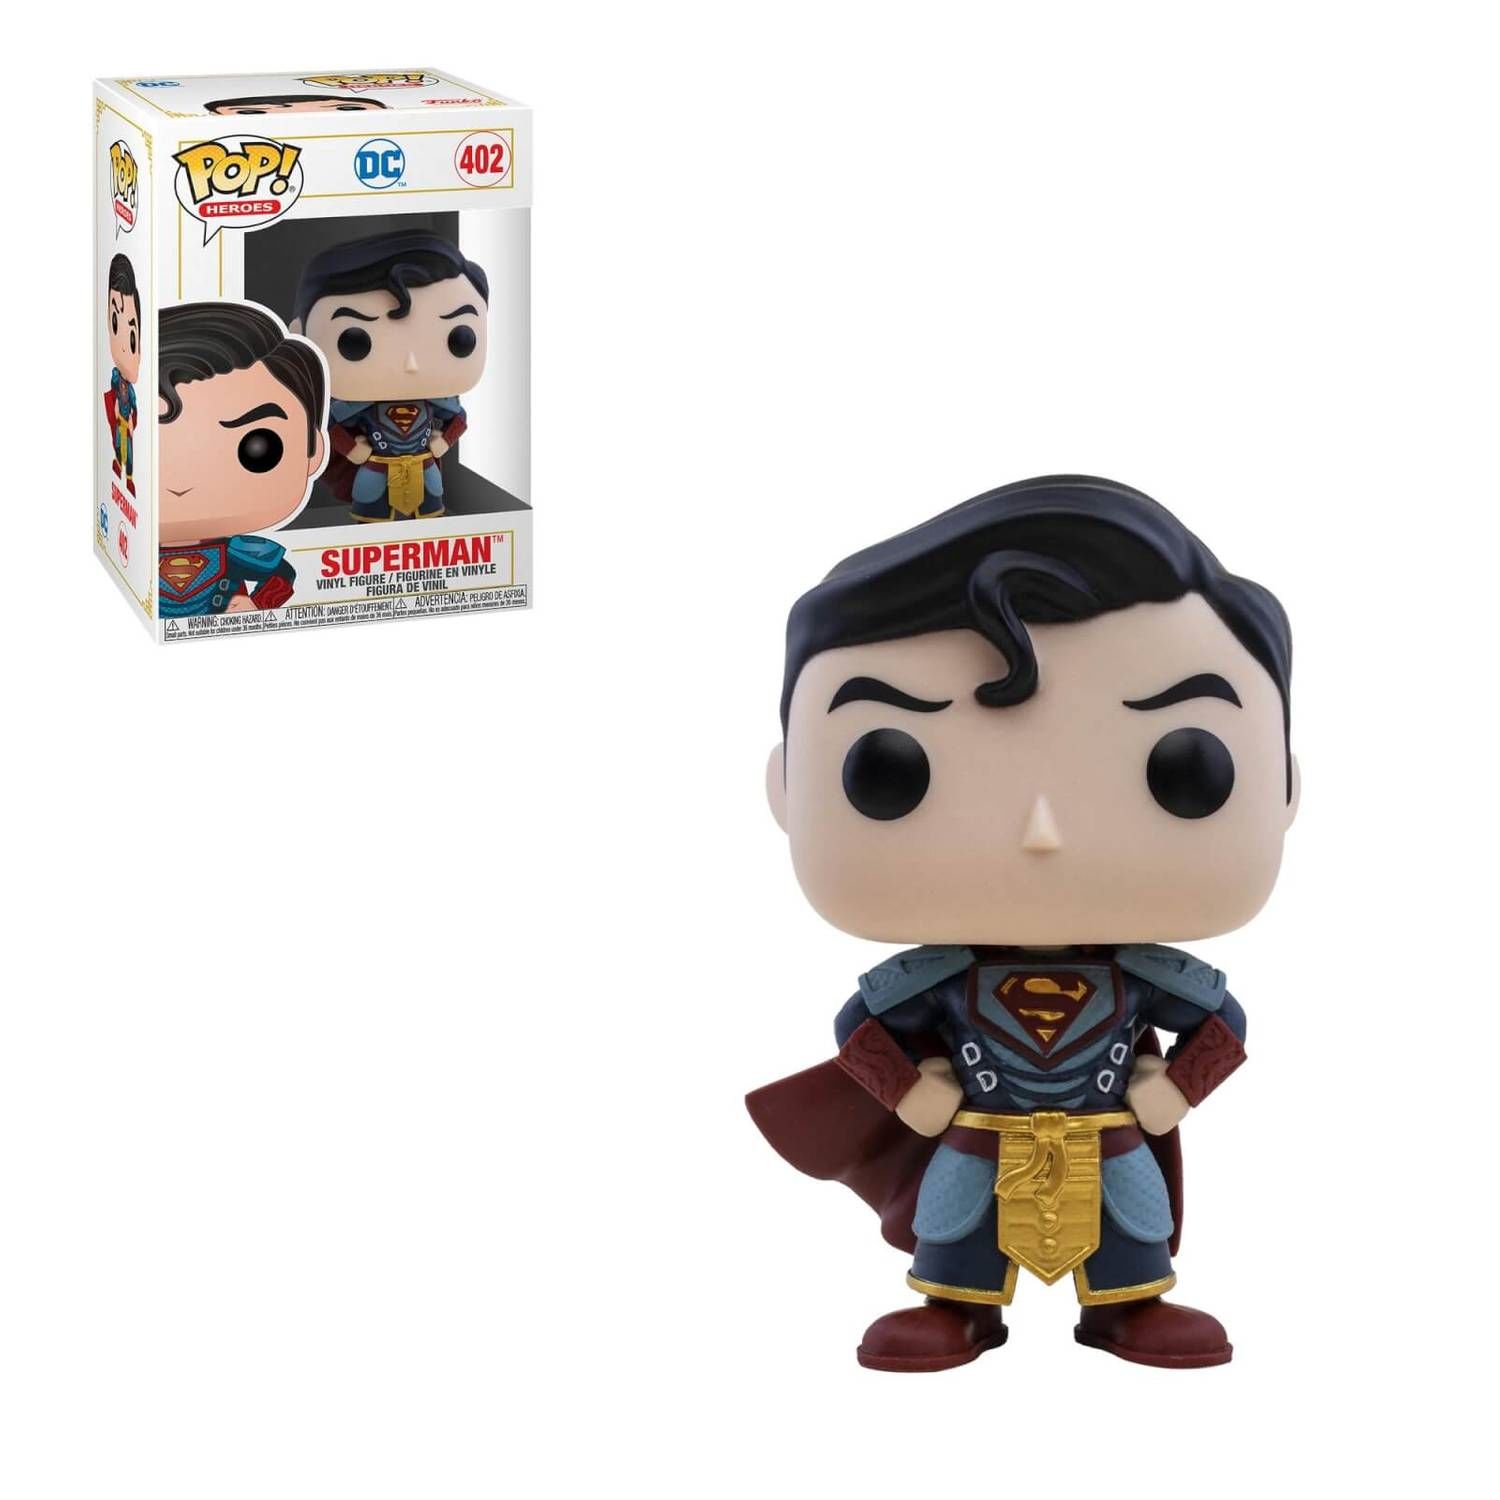 Funko Pop! - DC - Imperial Palace Superman 402